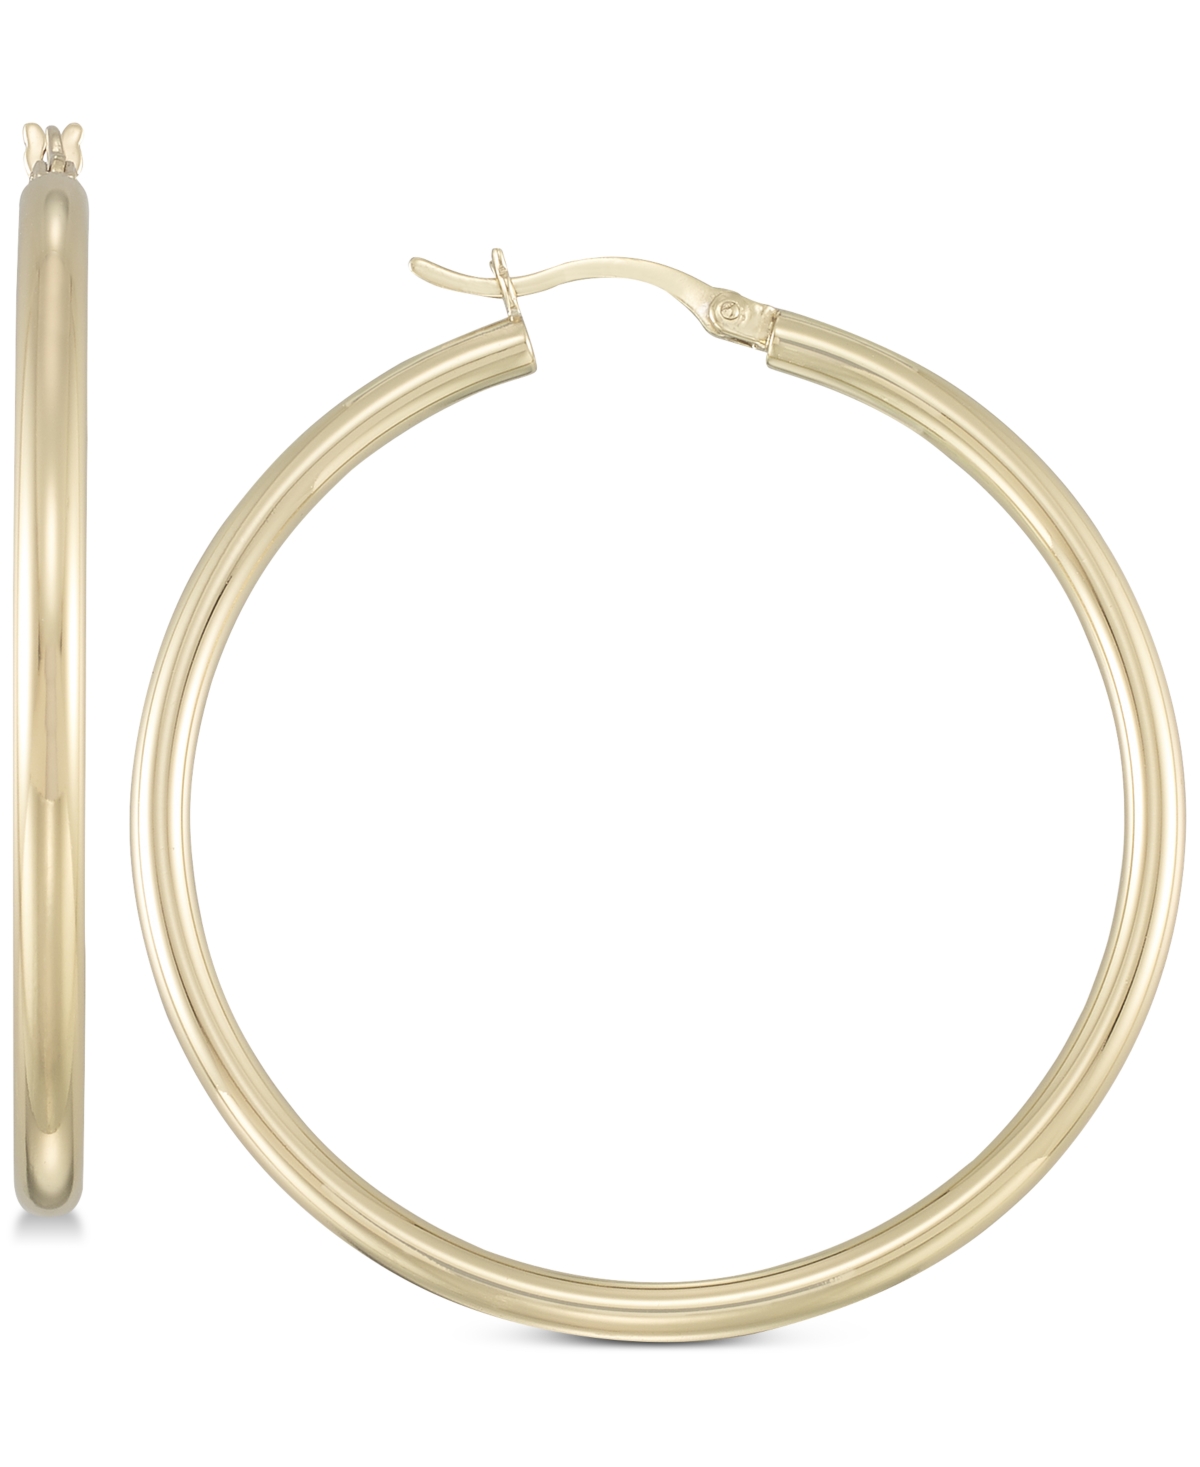 Polished Hoop Earrings in 18k Gold over Sterling Silver - k Gold Over Silver